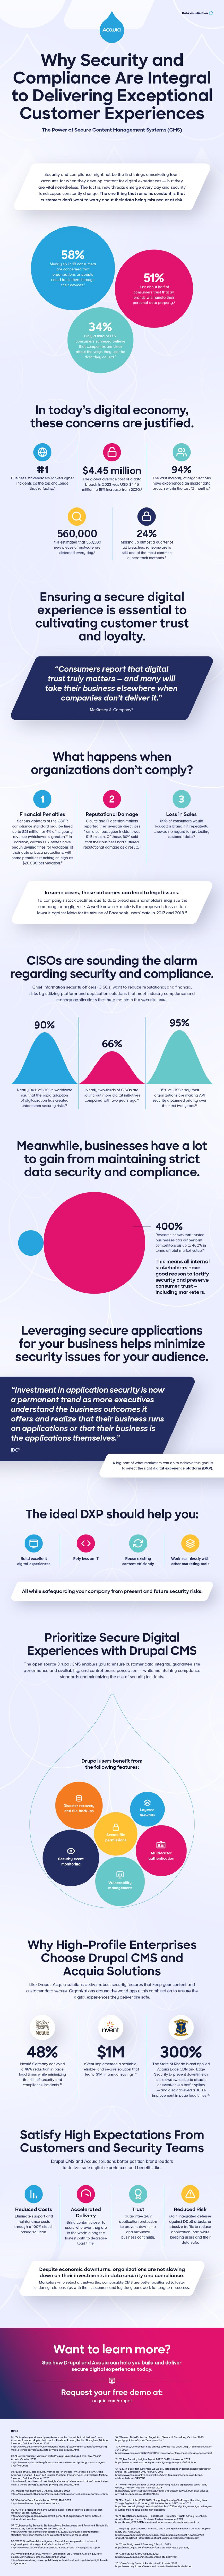 Infographic about security and compliance